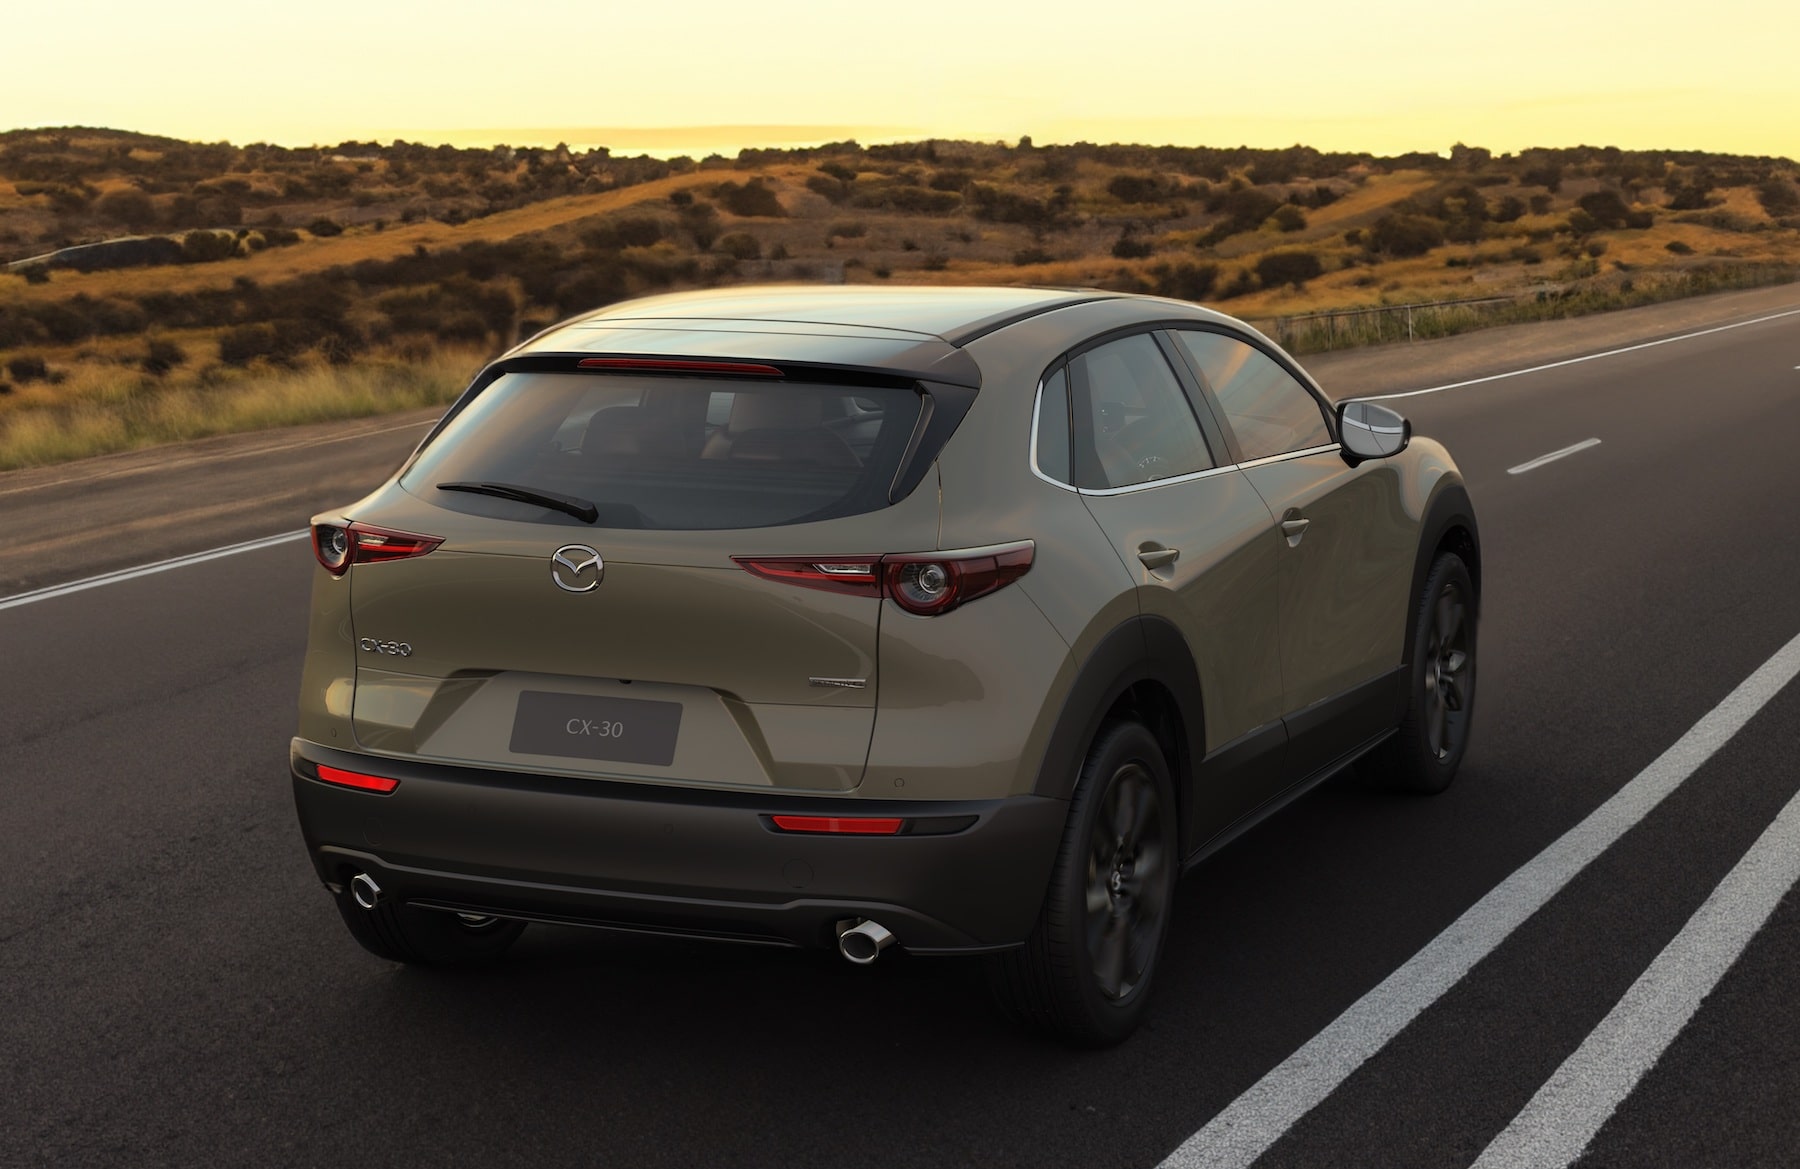 my24 mazda cx-30 prices & specs confirmed, arrives january